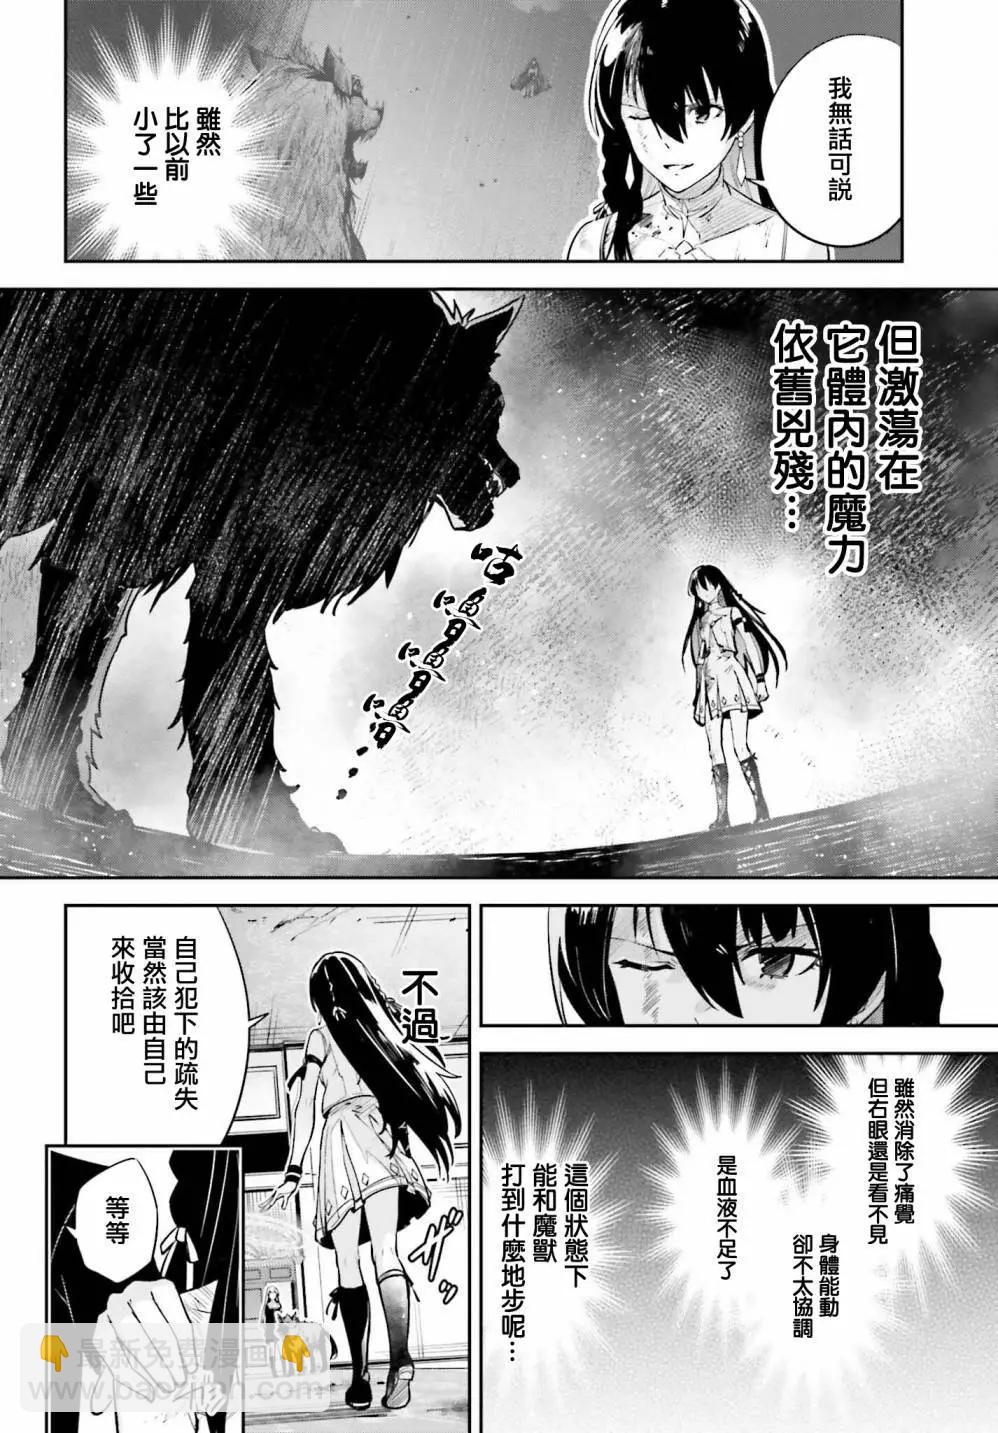 Unnamed Memory - 第27話 - 2